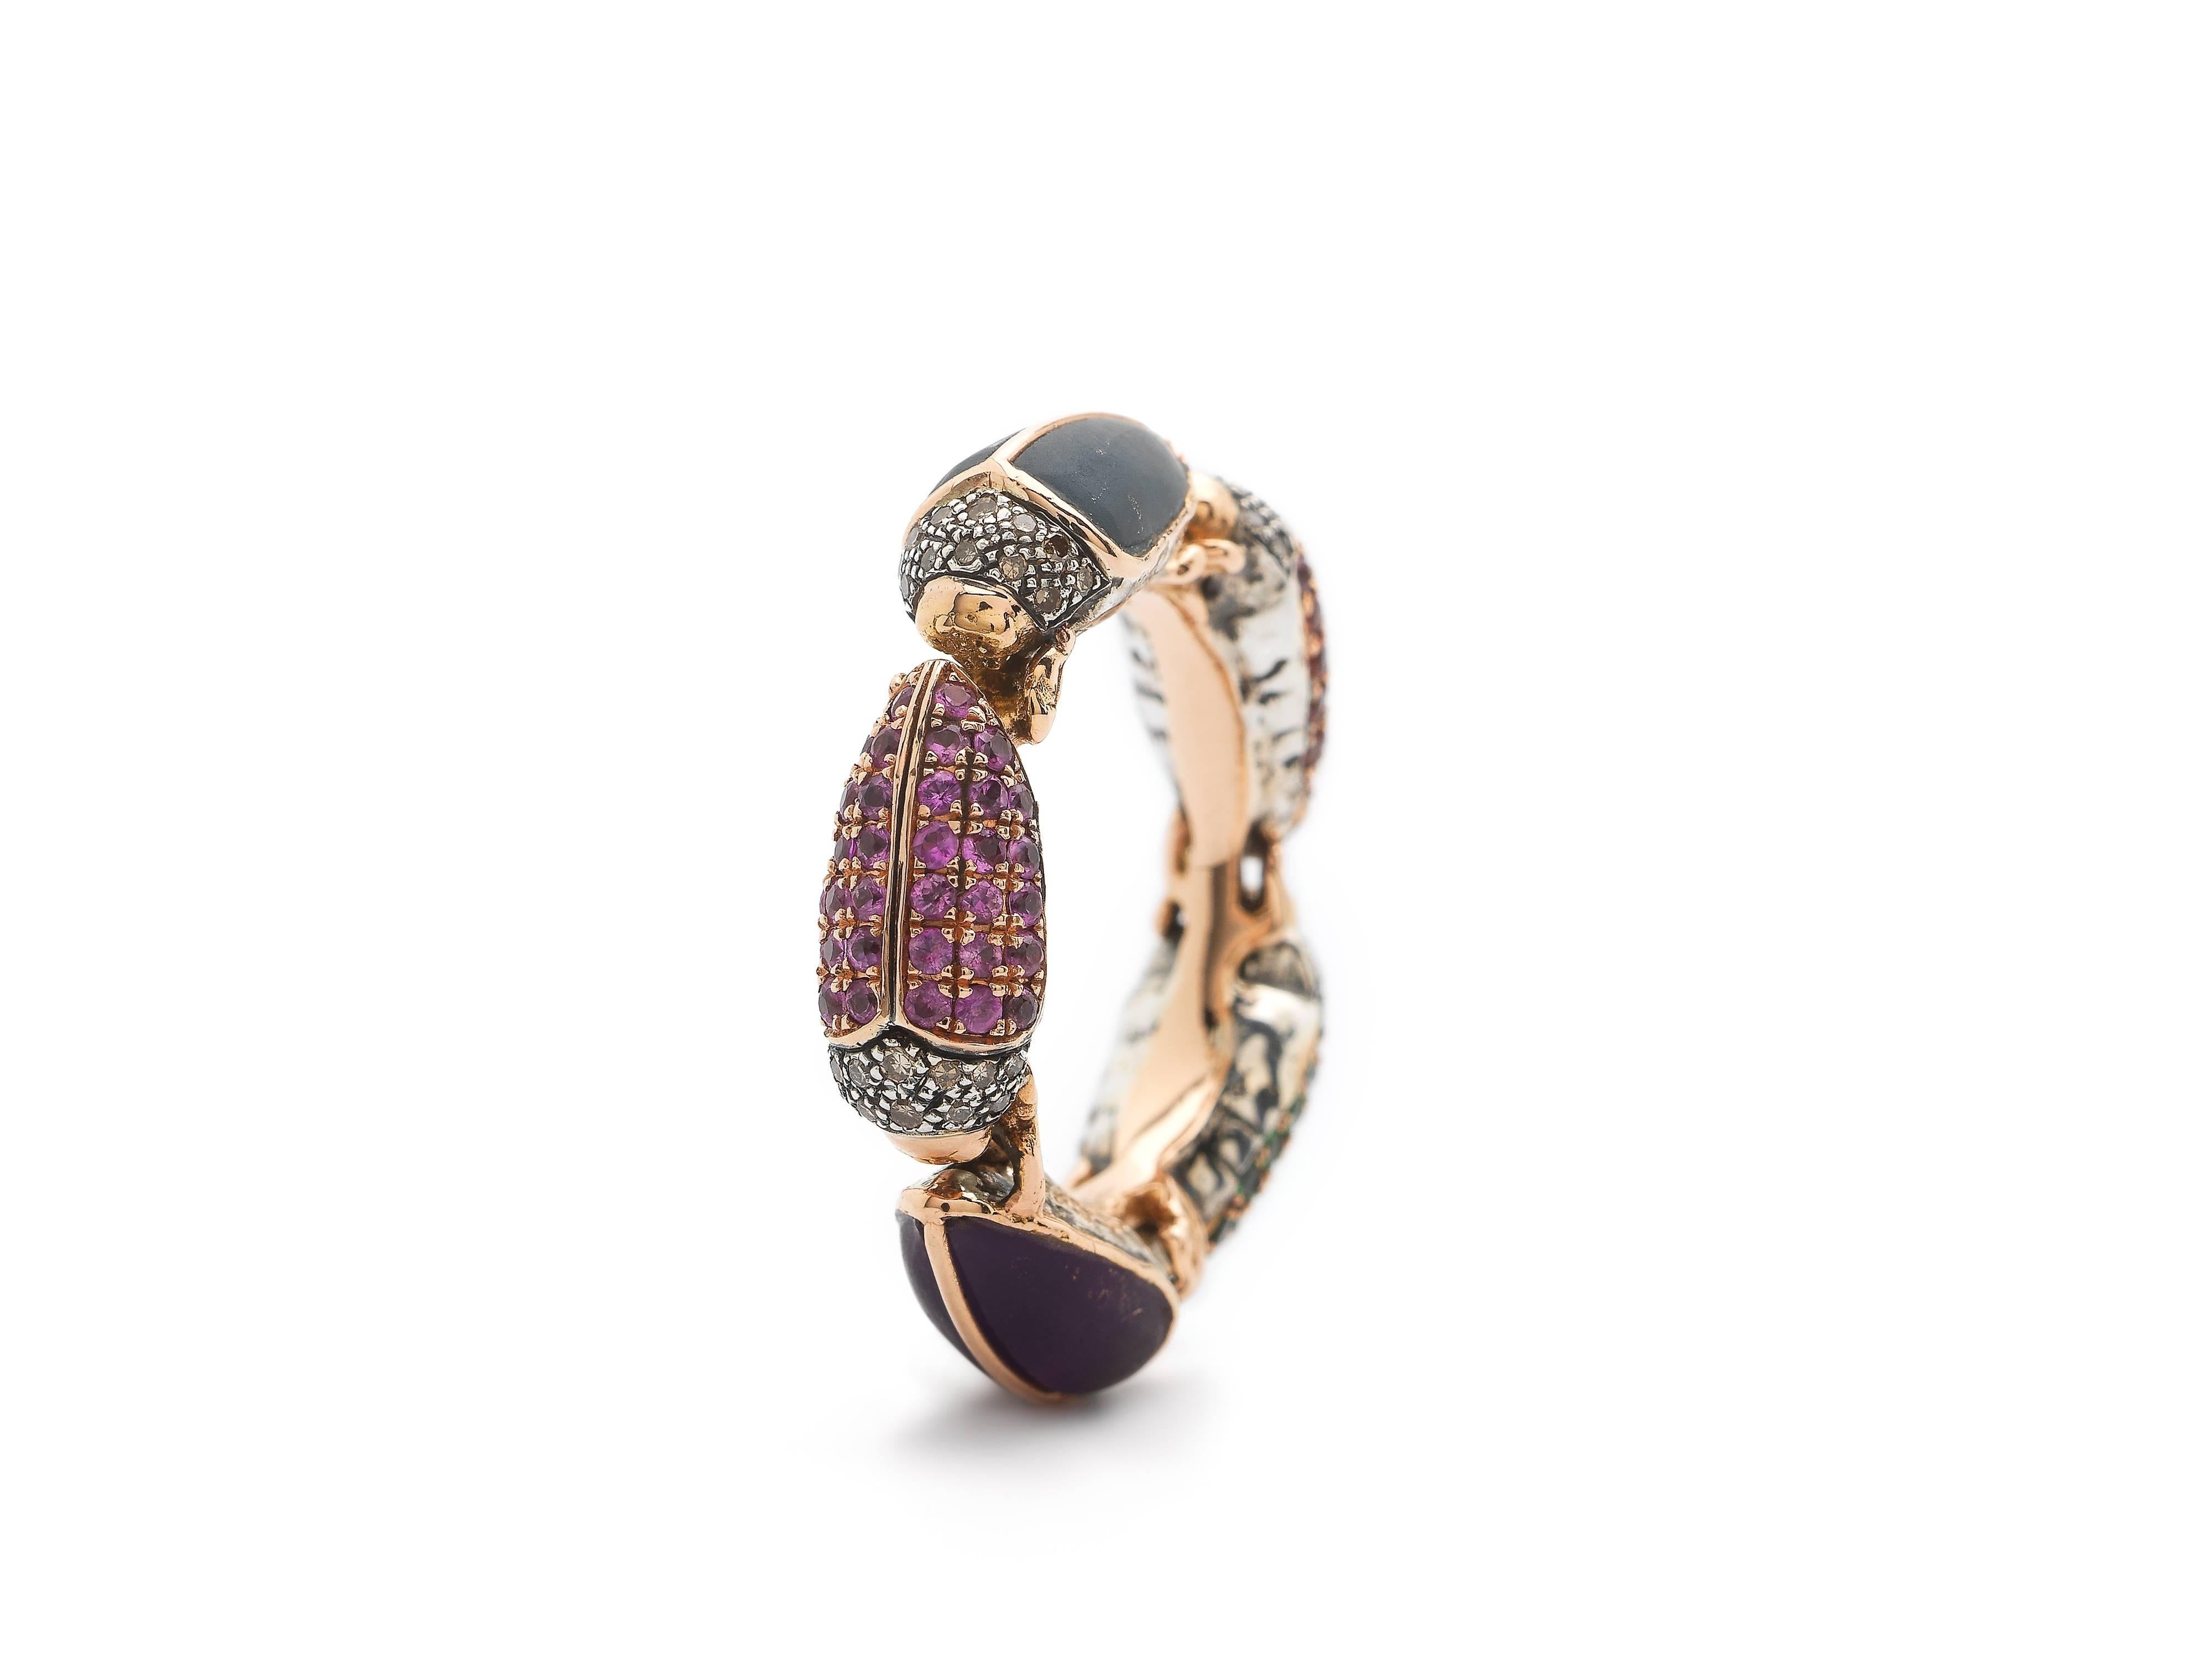 Five beautiful scarab beetles joined together make up the Scarab Eternity Ring, designed in 18k rose gold and sterling silver. The beetles in this ring are set with brown diamonds, amethyst, multi-coloured sapphires, blue topaz and tsavorites, but